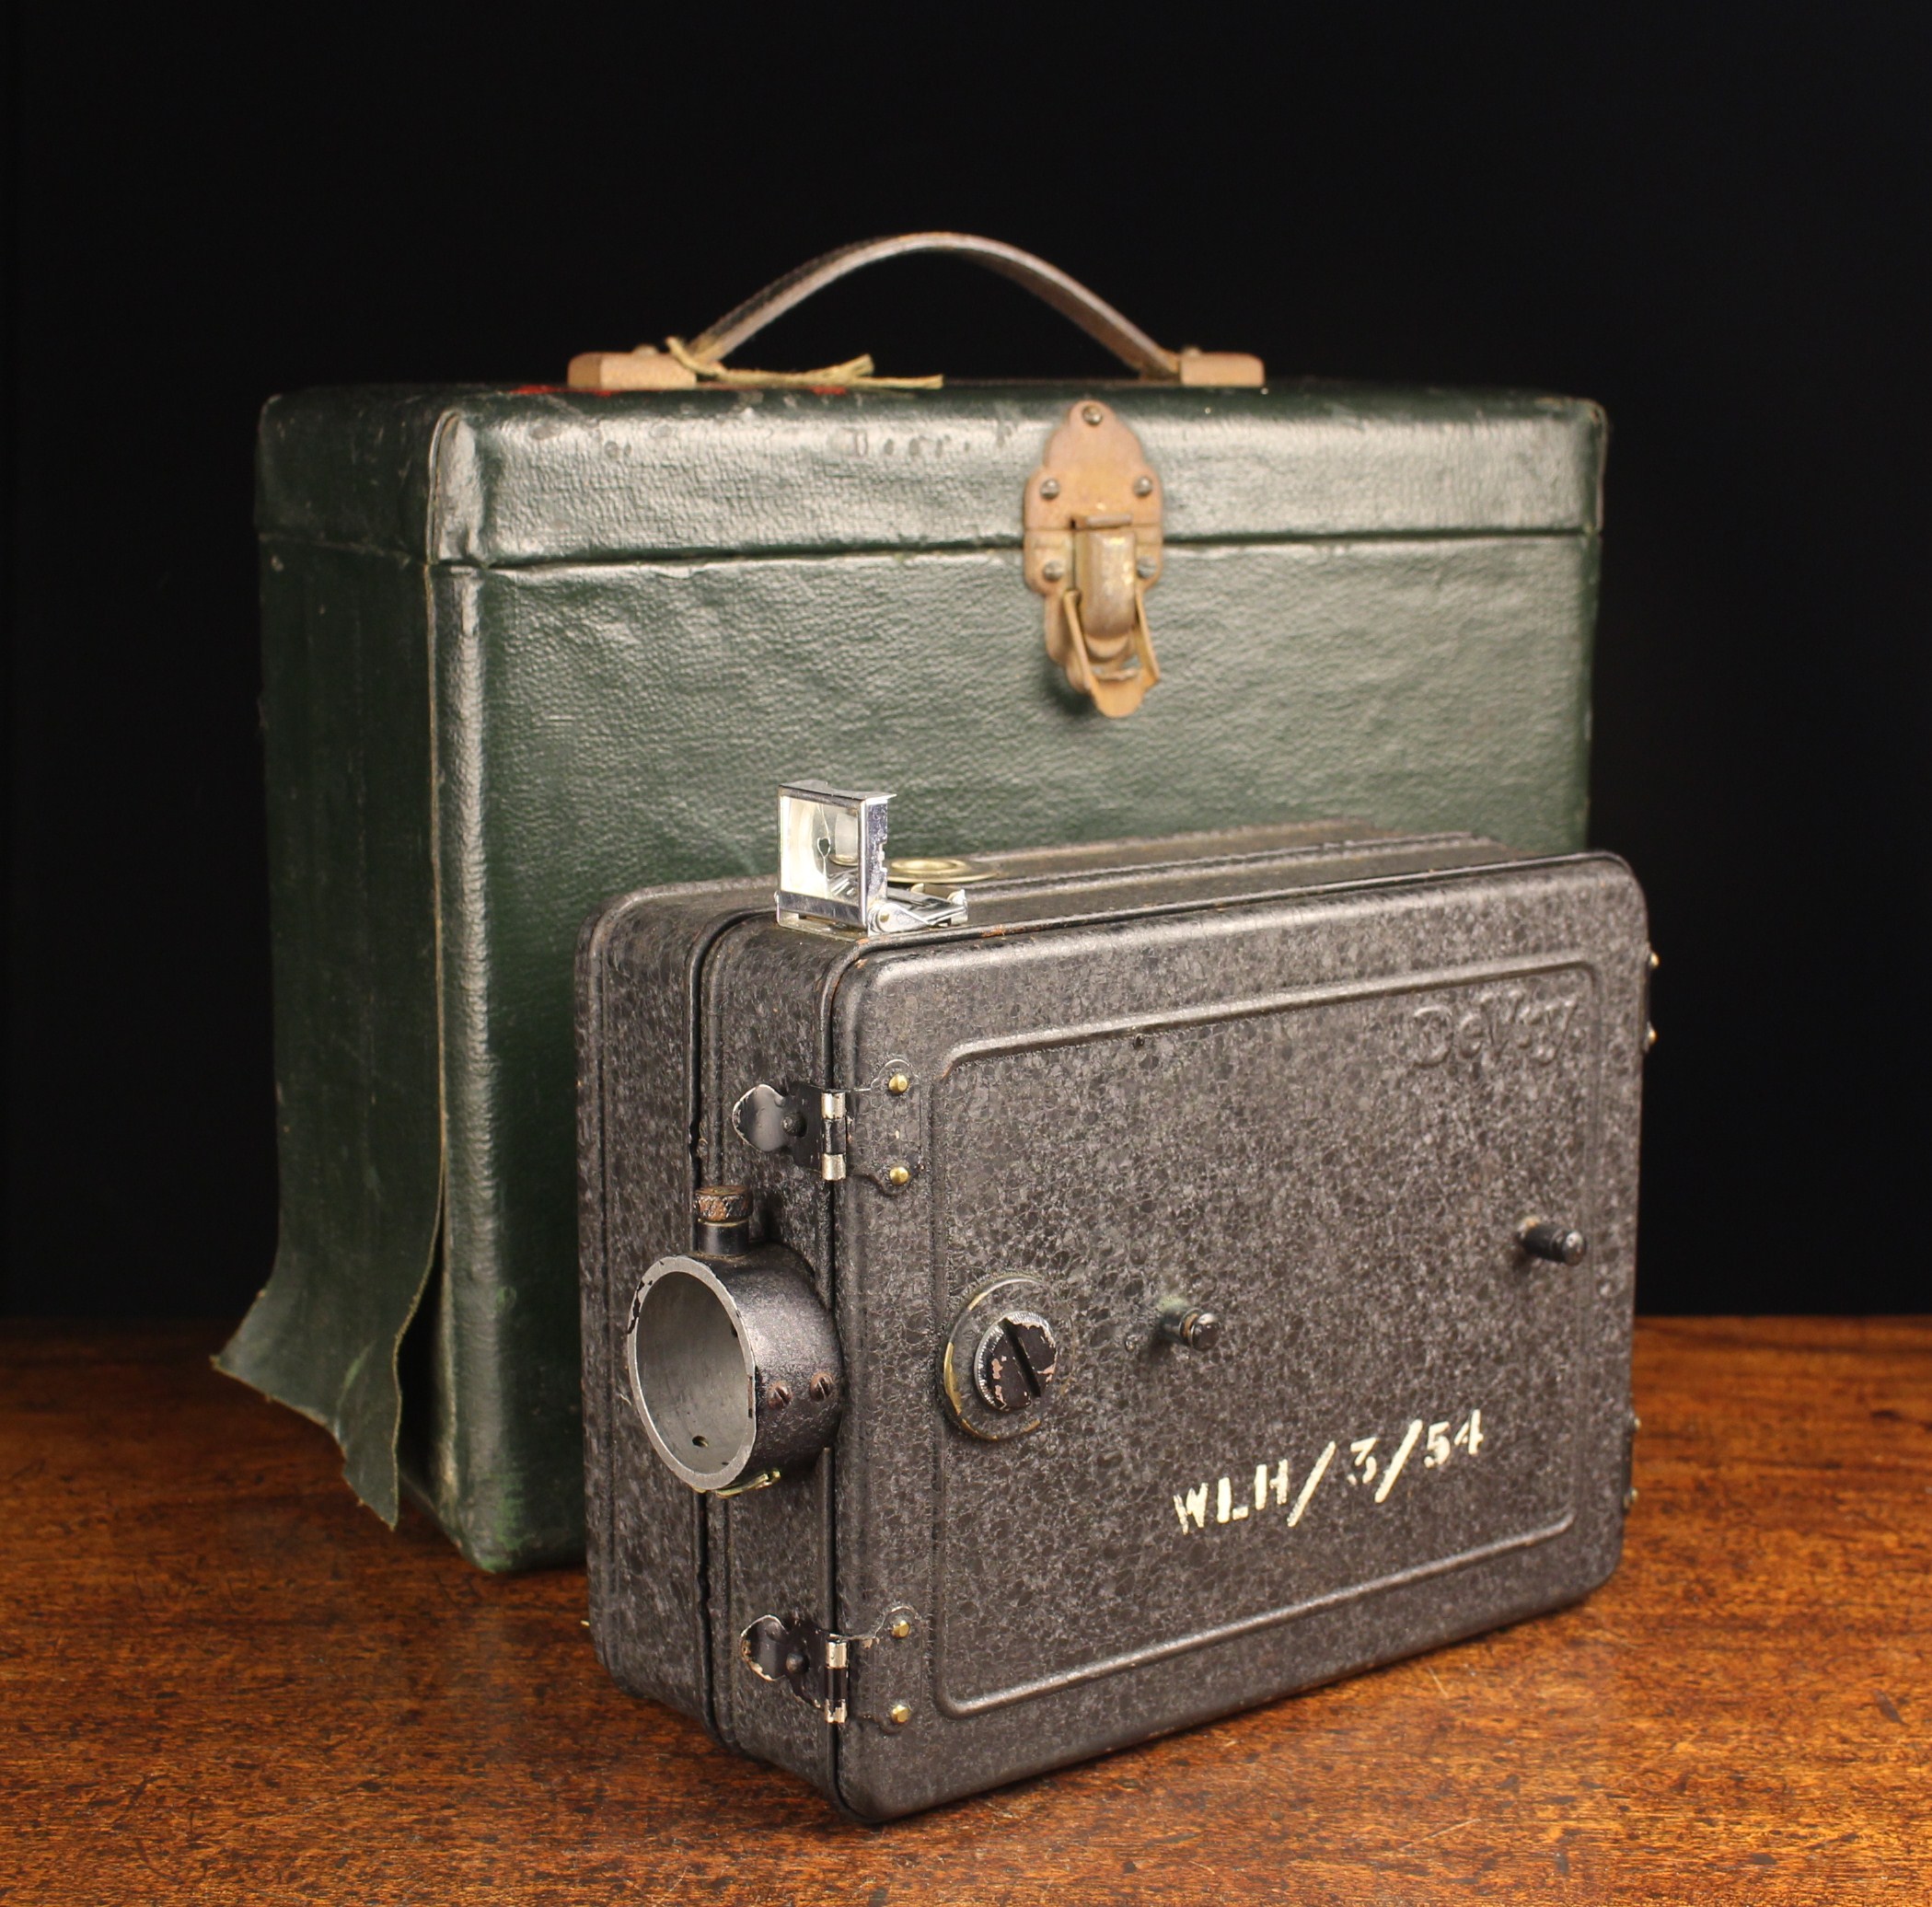 A Devry of Chicago 'Lunchbox' 35 mm Movie Camera Circa 1930/40's. - Image 2 of 2